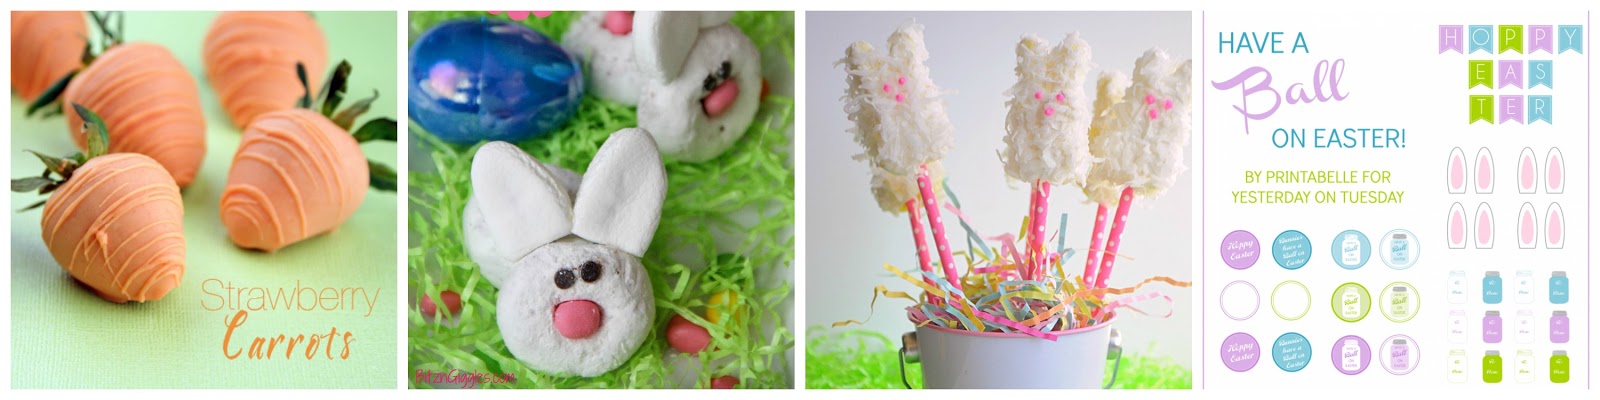 1 4 | The Everything Easter Round-Up | 18 |